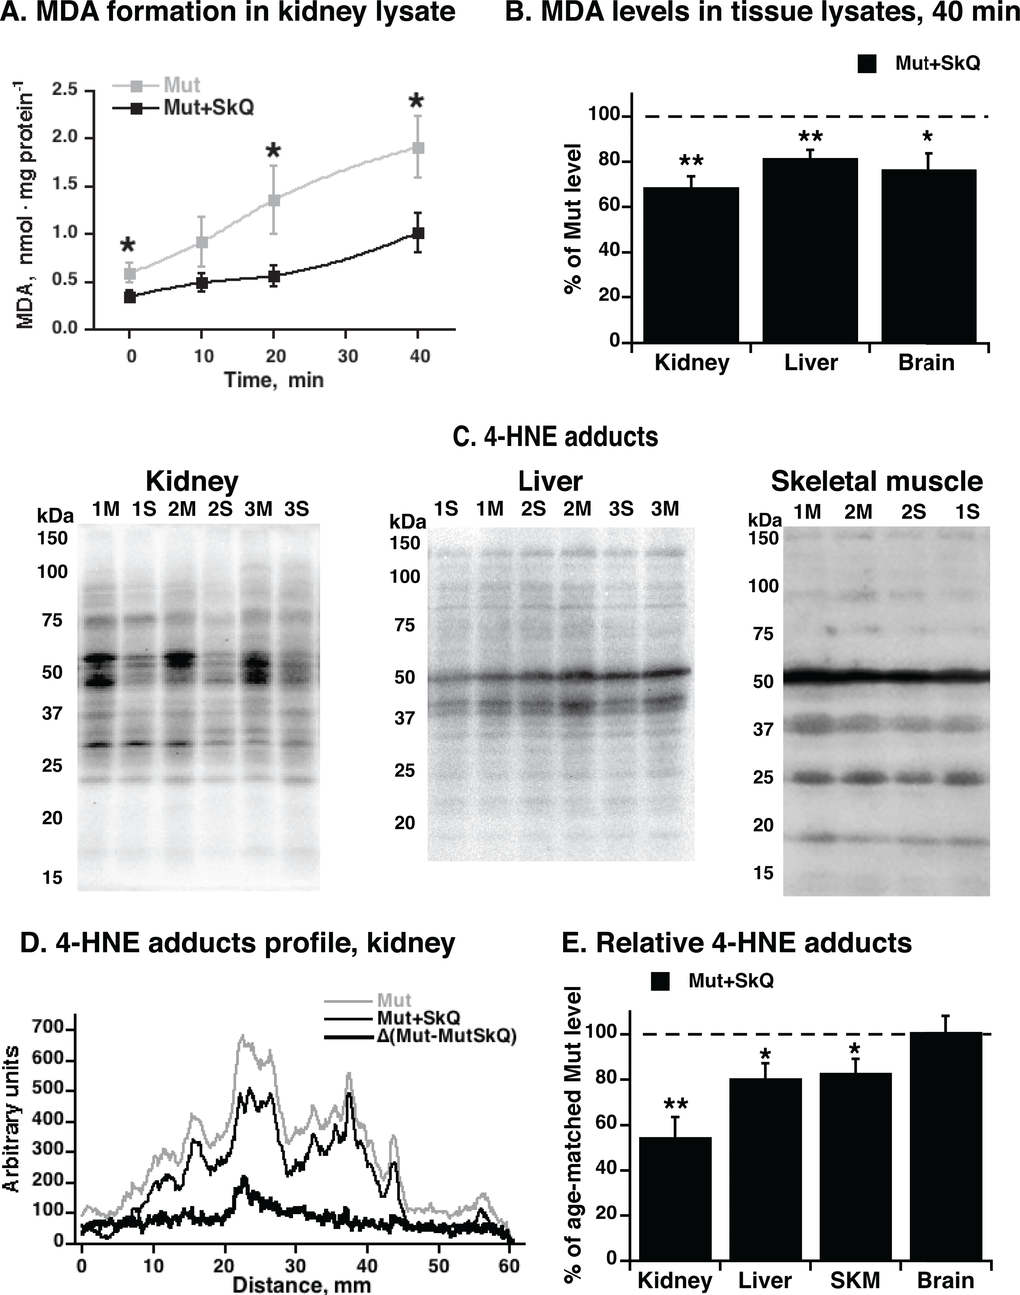 MDA formation and content of 4-HNE adducts in tissues from mtDNA mutator mice non-treated and treated with SkQ1. (A) MDA formation in kidney lysate exposed to normal atmospheric oxygen concentration and pressure at 37 °C. (B) Levels of MDA formed in liver, brain and kidney lysates after 40 min of exposure of tissue to normal atmospheric oxygen concentration and pressure. (C) Representative immunoblot analysis of 4-hydroxynonenal (4-HNE) adducts in kidney (left panel), liver (middle panel) and gastrocnemius skeletal muscle (right panel) tissue lysate from non-treated (M) and SkQ1-treated (S) mtDNA mutator mice (15 µg protein/lane). Numbers 1, 2, 3 indicate age-and gender-matched samples. Validation of the assay is presented in Fig. S1A. Loading control was performed by Ponceau Red staining (shown for kidney in Fig. S1C). (D) Profile of 4-HNE-adducts in kidney lysate. (E) Relative 4-HNE-adducts in kidney, liver, skeletal muscle (SKM) and brain tissue lysates. Tissue samples were collected in parallel from non-treated and SkQ1-treated mice (268–300 days old, both genders) in the paired death experimental setup. In B and E, for each pair, the mean level of 4-HNE-adducts in the non-treated mouse was set to 100% (indicated as dashed line) and the amount in the paired (age- and gender-matched) SkQ1-treated mouse was expressed relative to this. The means ± S.E. for 4-7 mice are shown. * and ** in A, B and E indicate statistical significance between SkQ1-treated and non-treated mice (p 